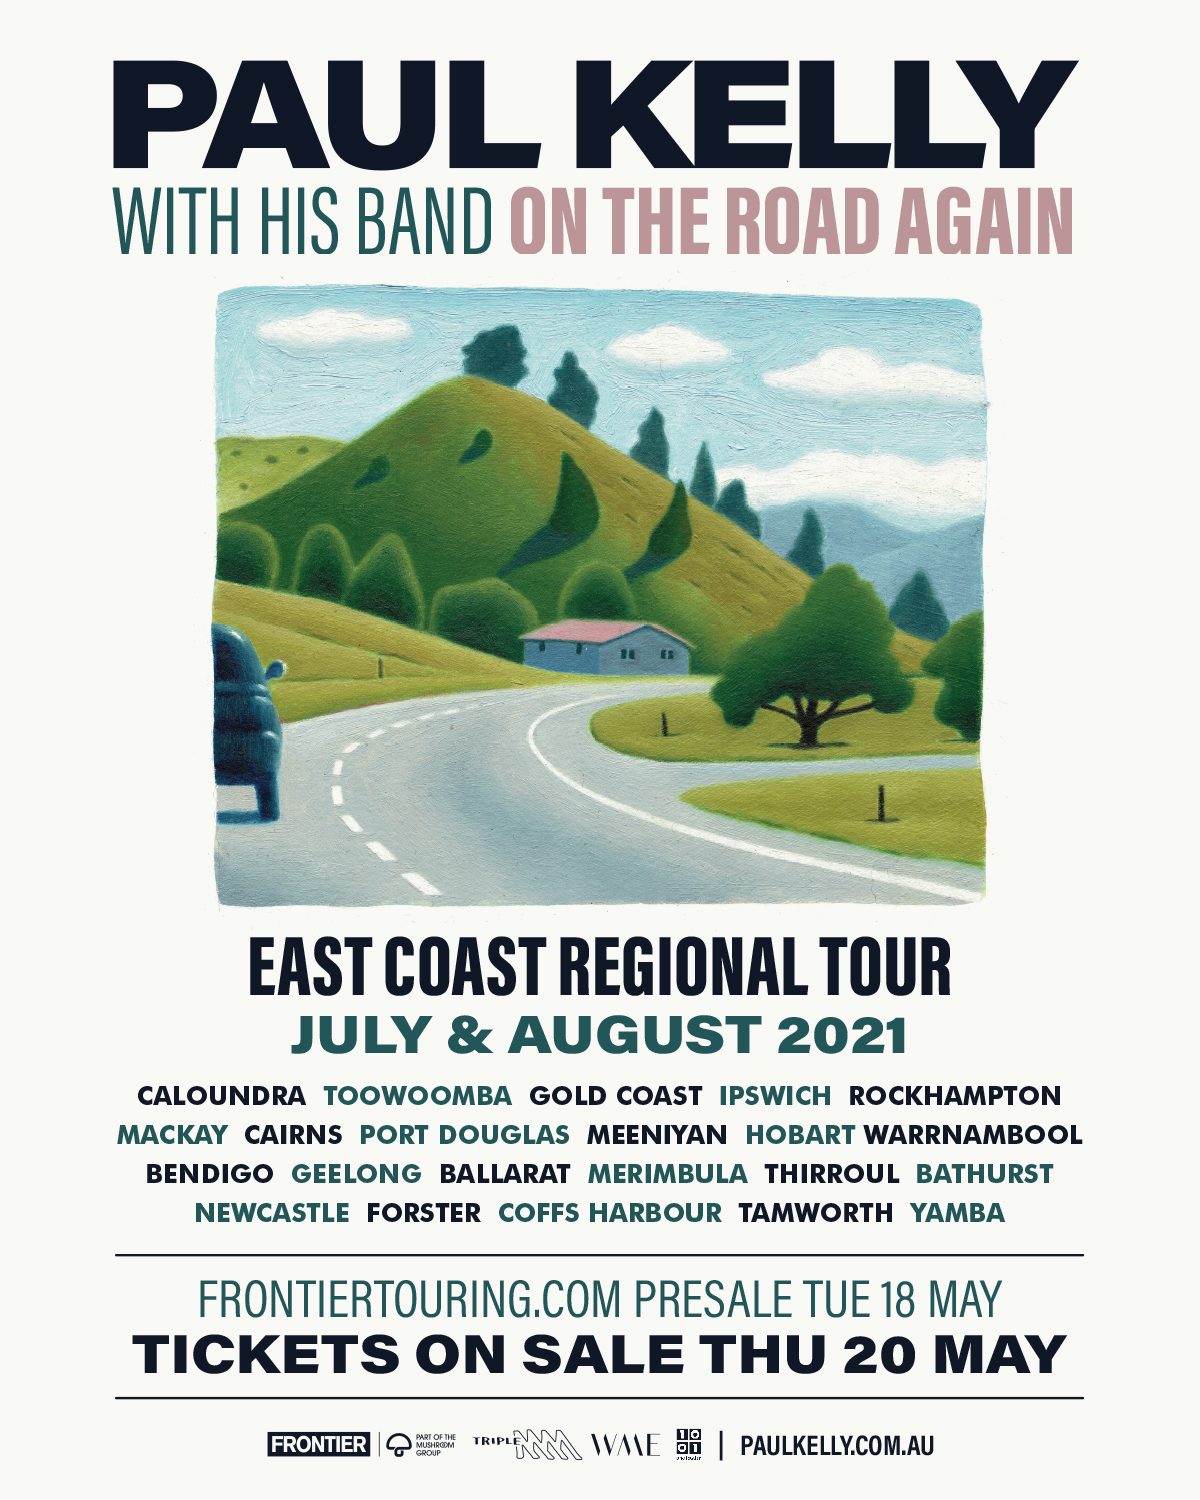 Paul Kelly with his band return to the stage for their 24-date ‘On The Road Again’ East Coast regional tour | July & August 2021